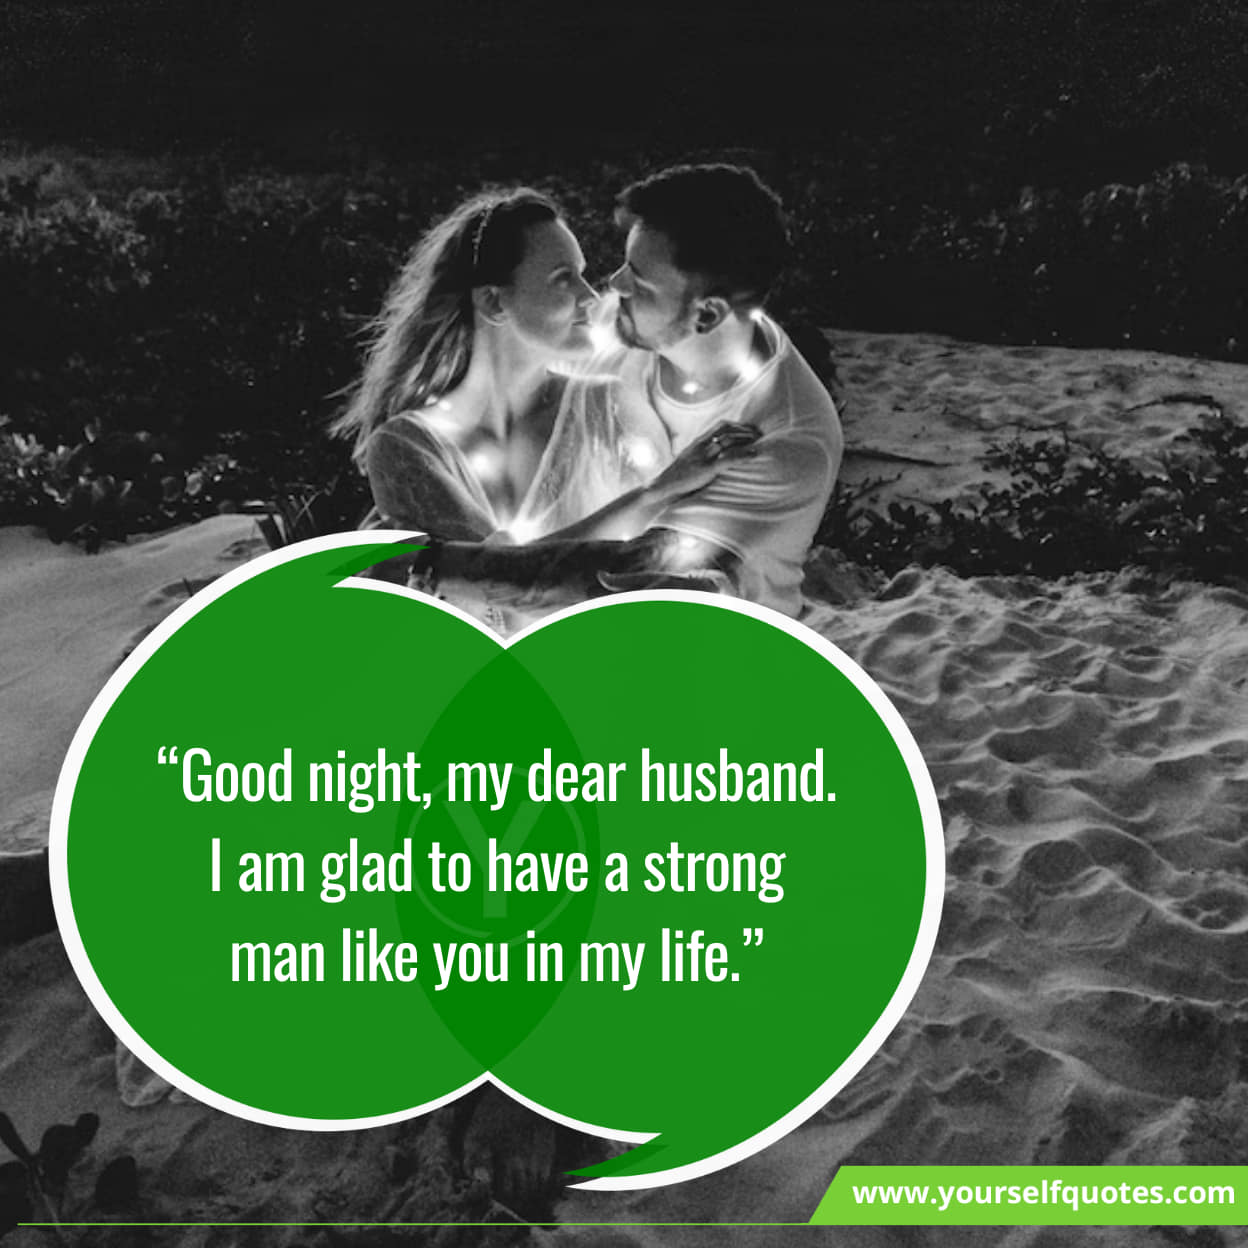 Heart Warming Good Night Messages for Husband